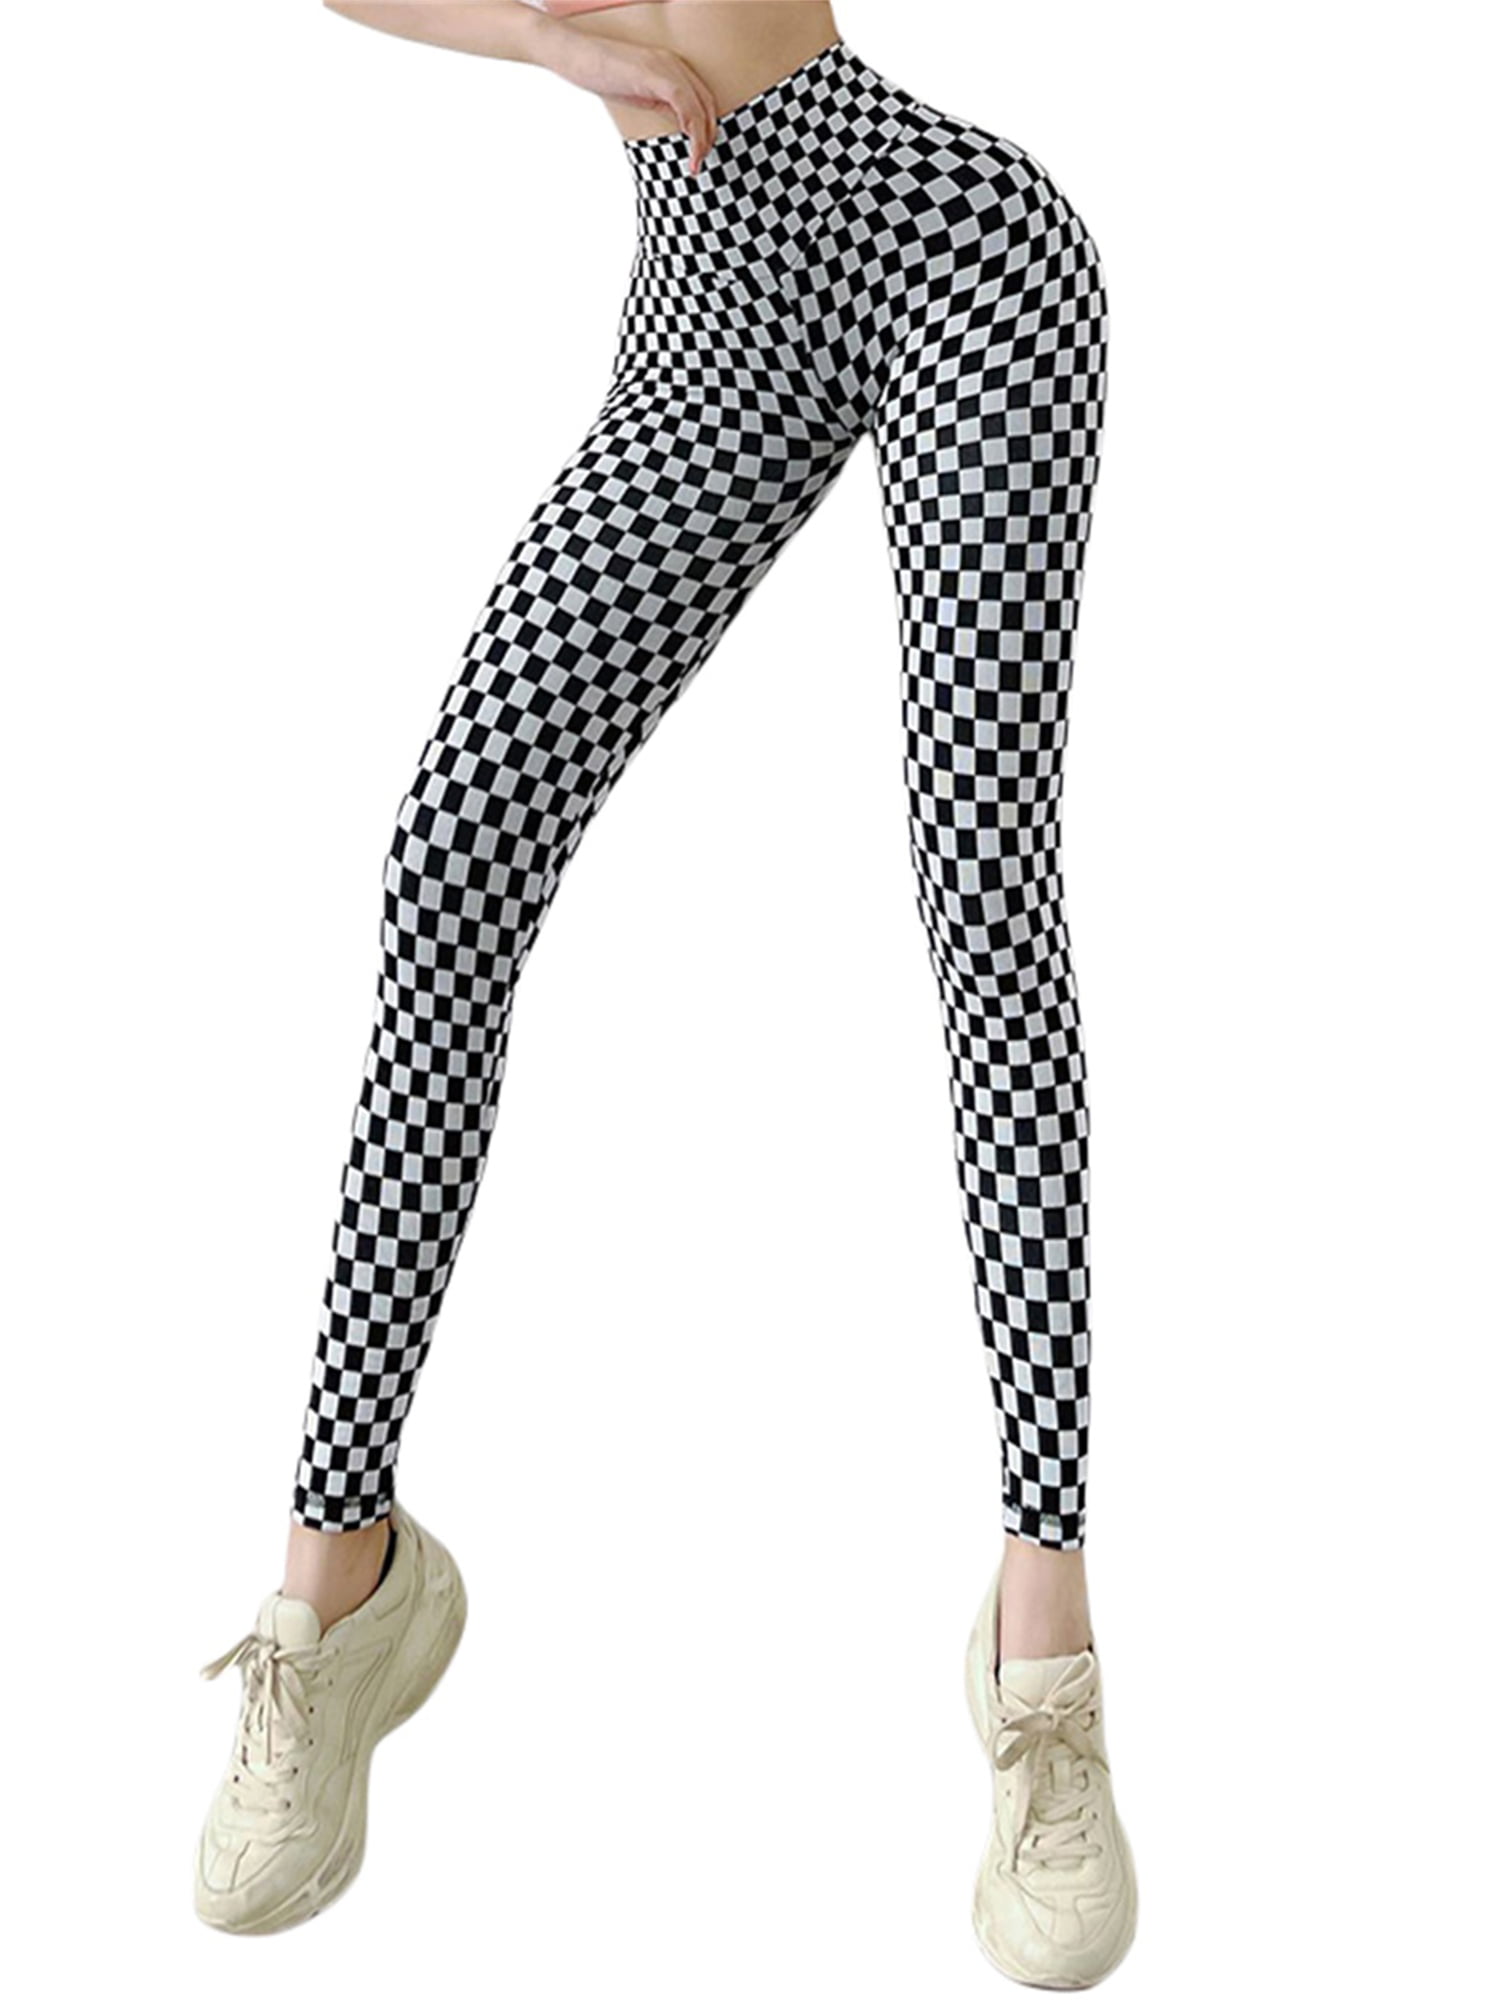 Chess Board Trousers Black & White Excellent Quality Elasticated Waist Unisex 